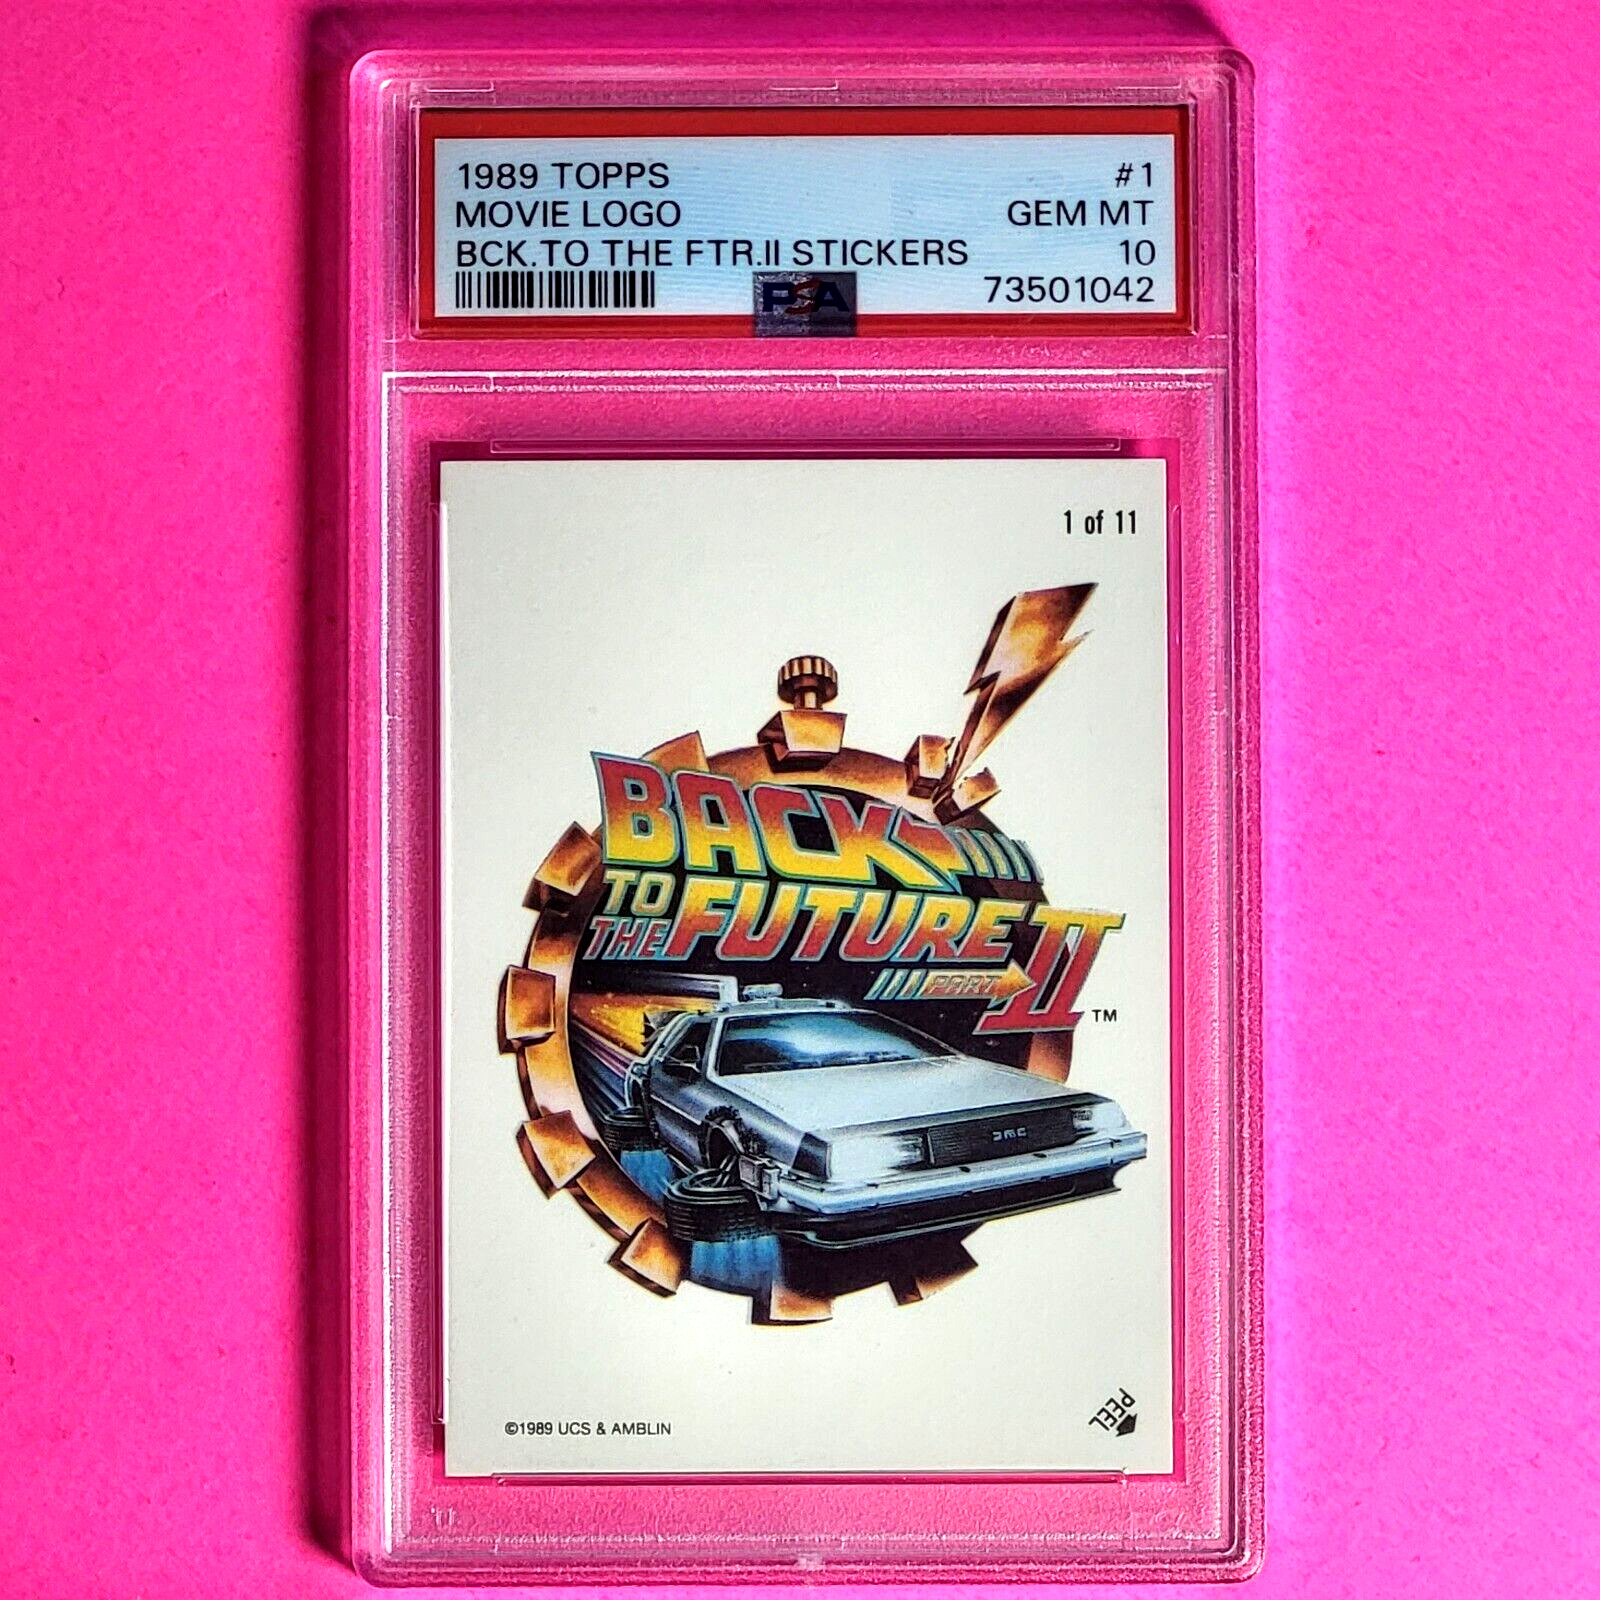 1989 Topps Back to the Future  #1 Poster Movie Logo sticker - PSA 10 Gem Mint